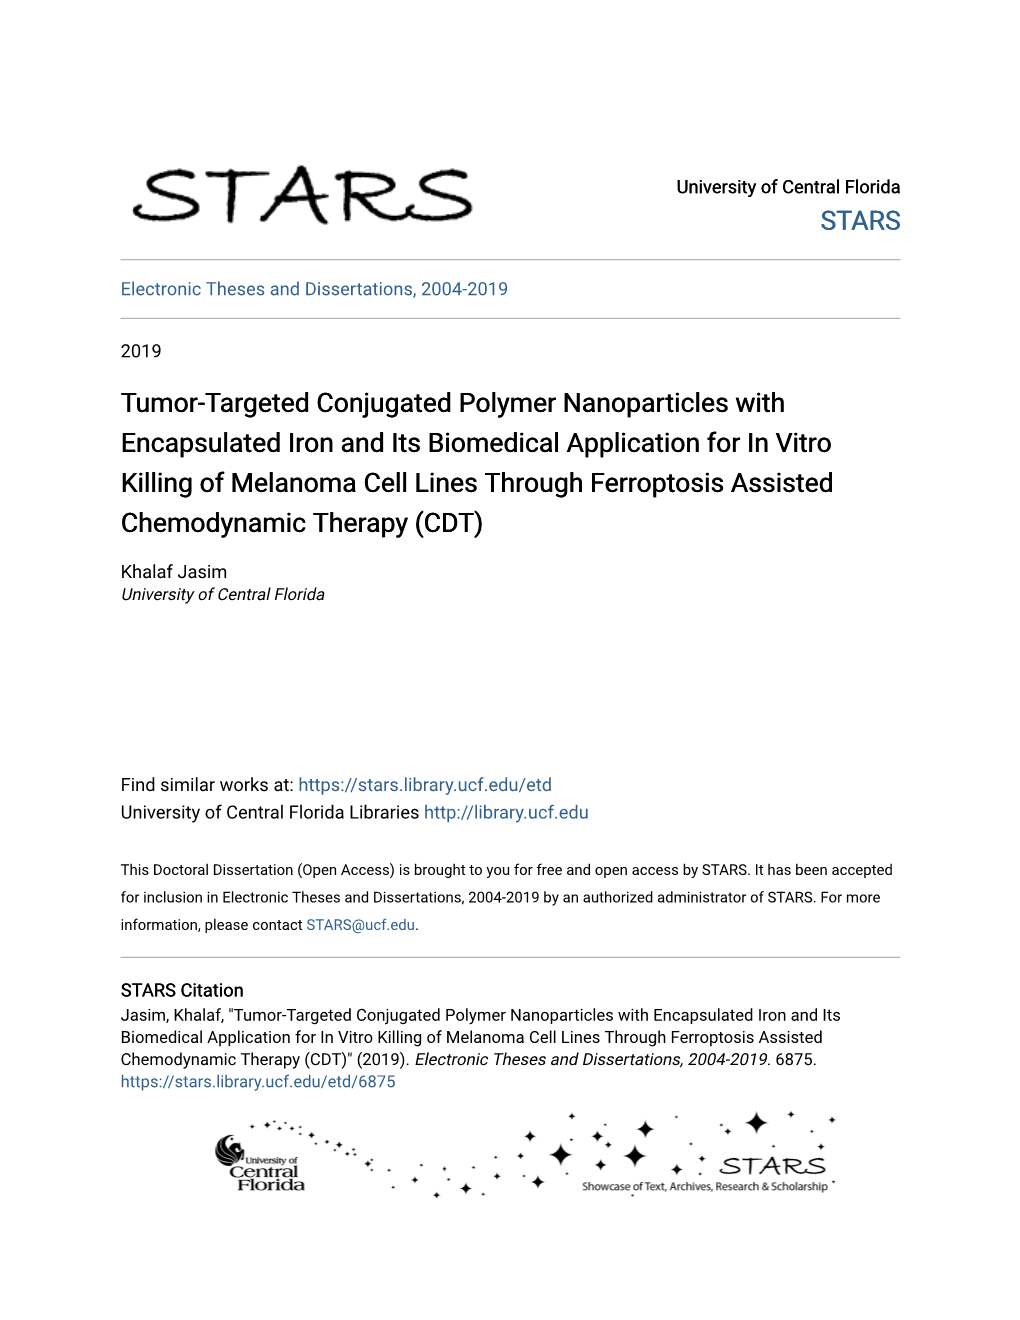 Tumor-Targeted Conjugated Polymer Nanoparticles with Encapsulated